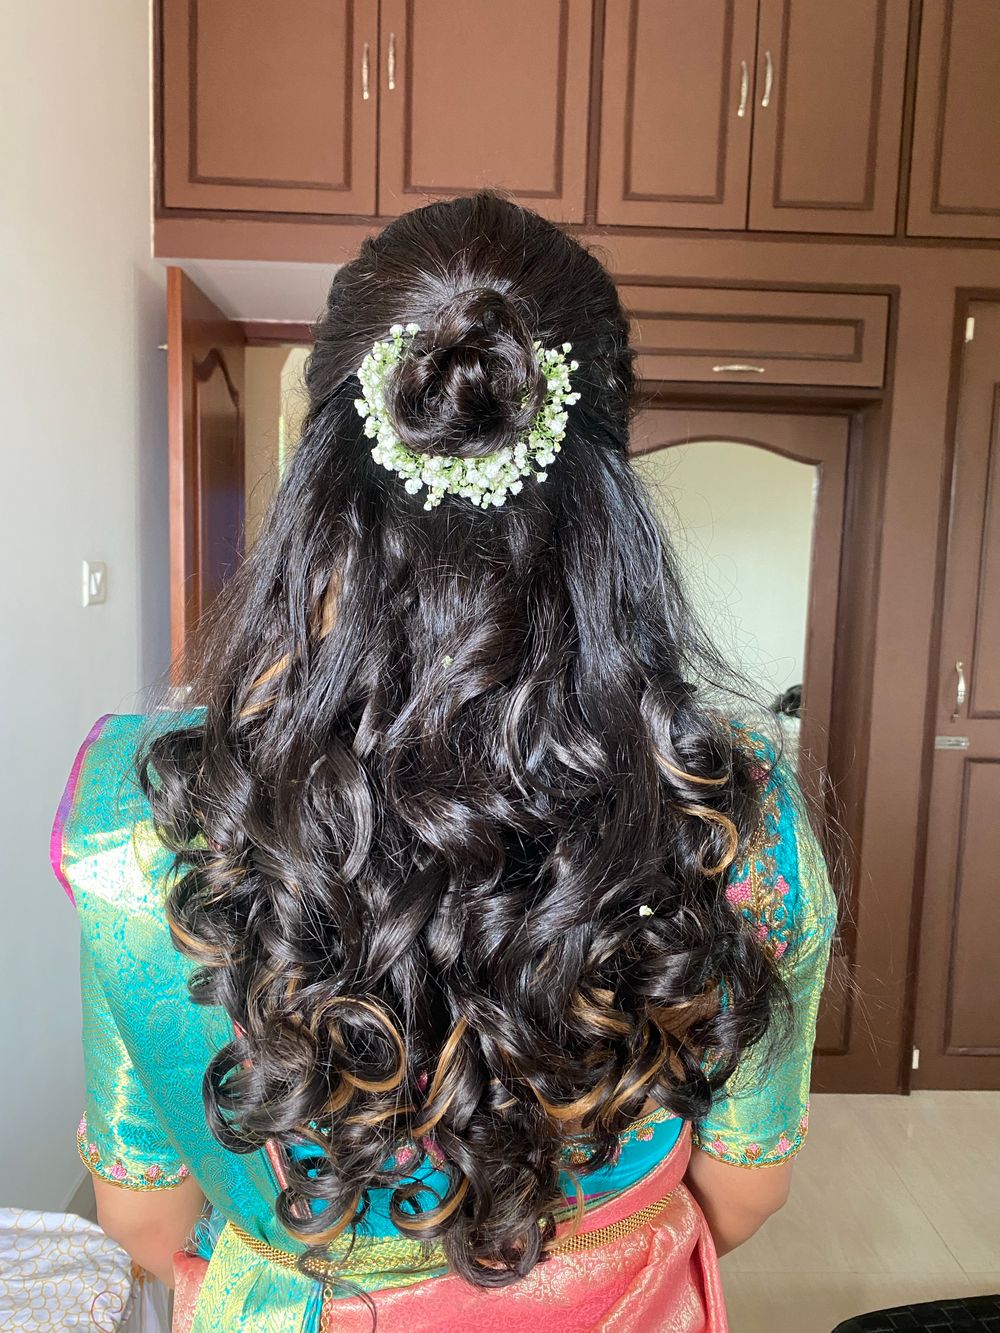 Photo From Hairstyles - By Priya Chandra Makeovers